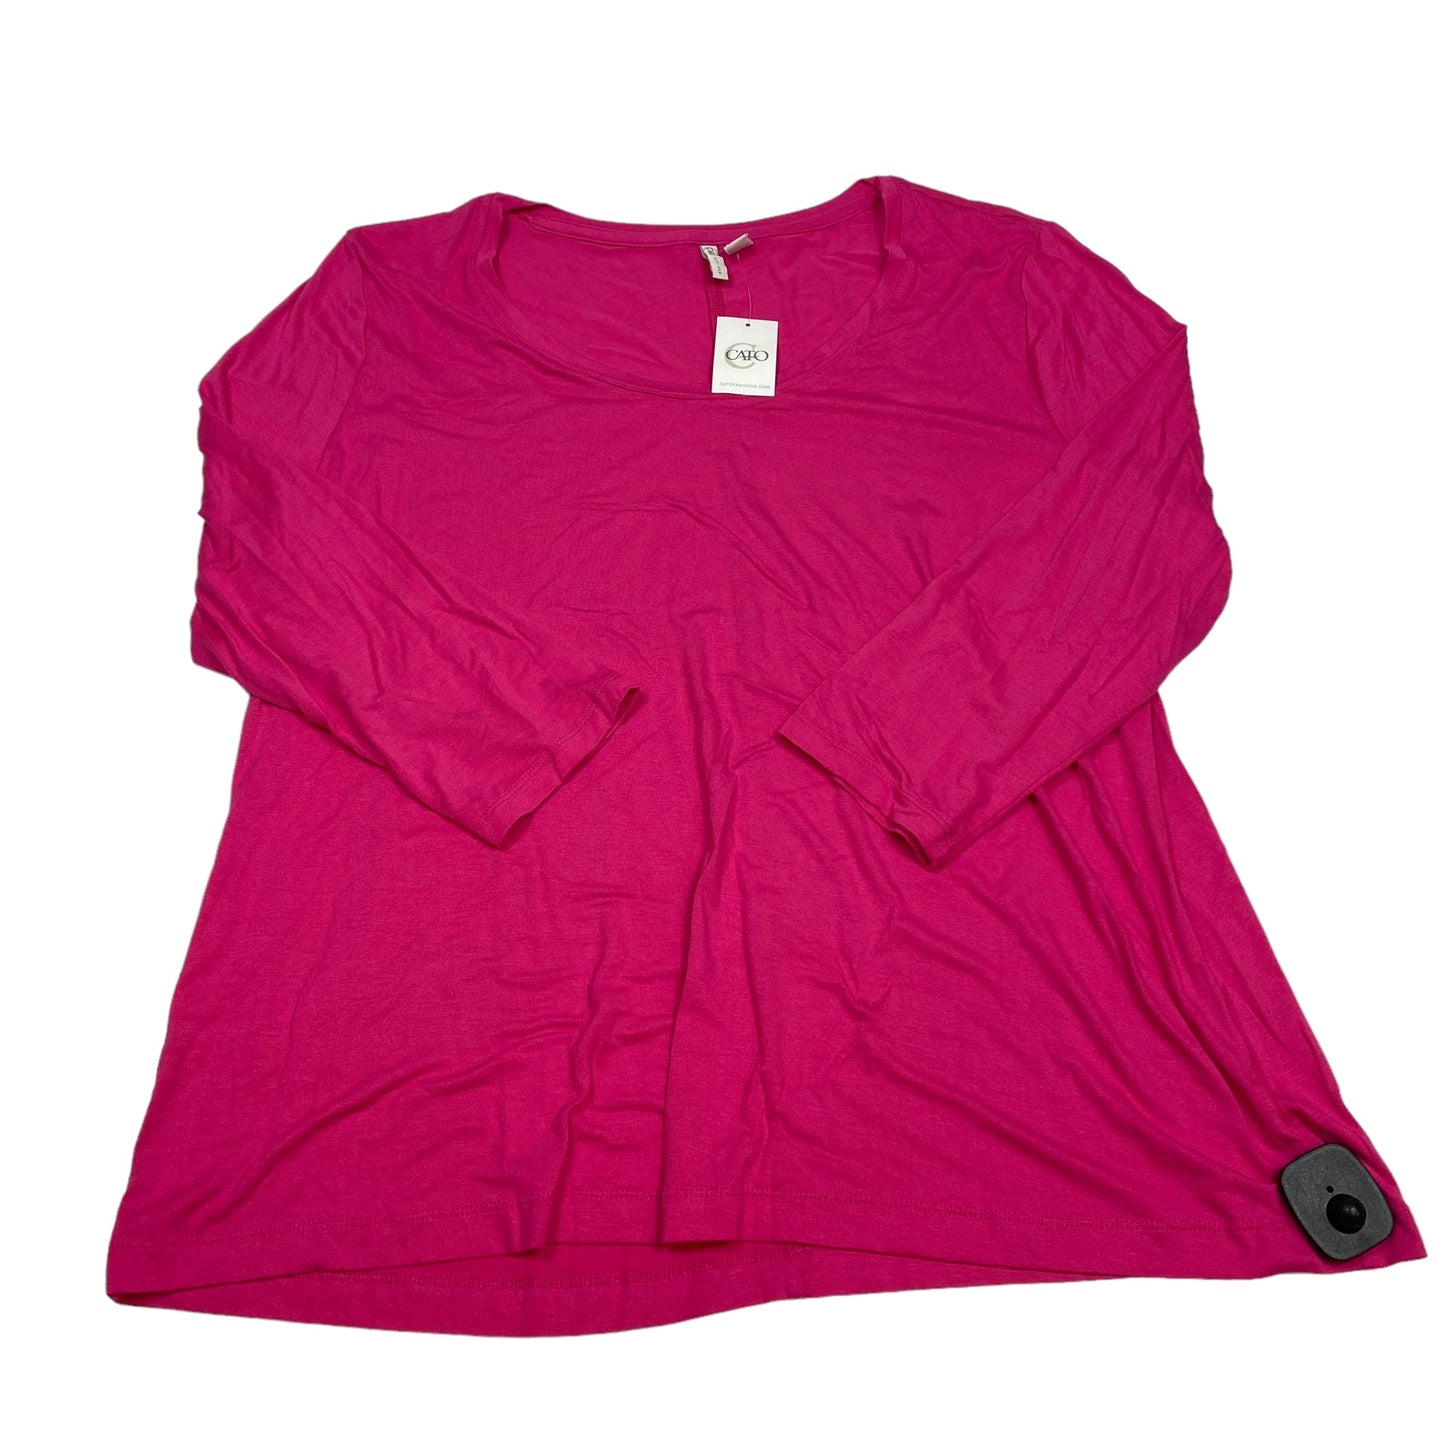 Pink Top Long Sleeve Basic Cato, Size Xl